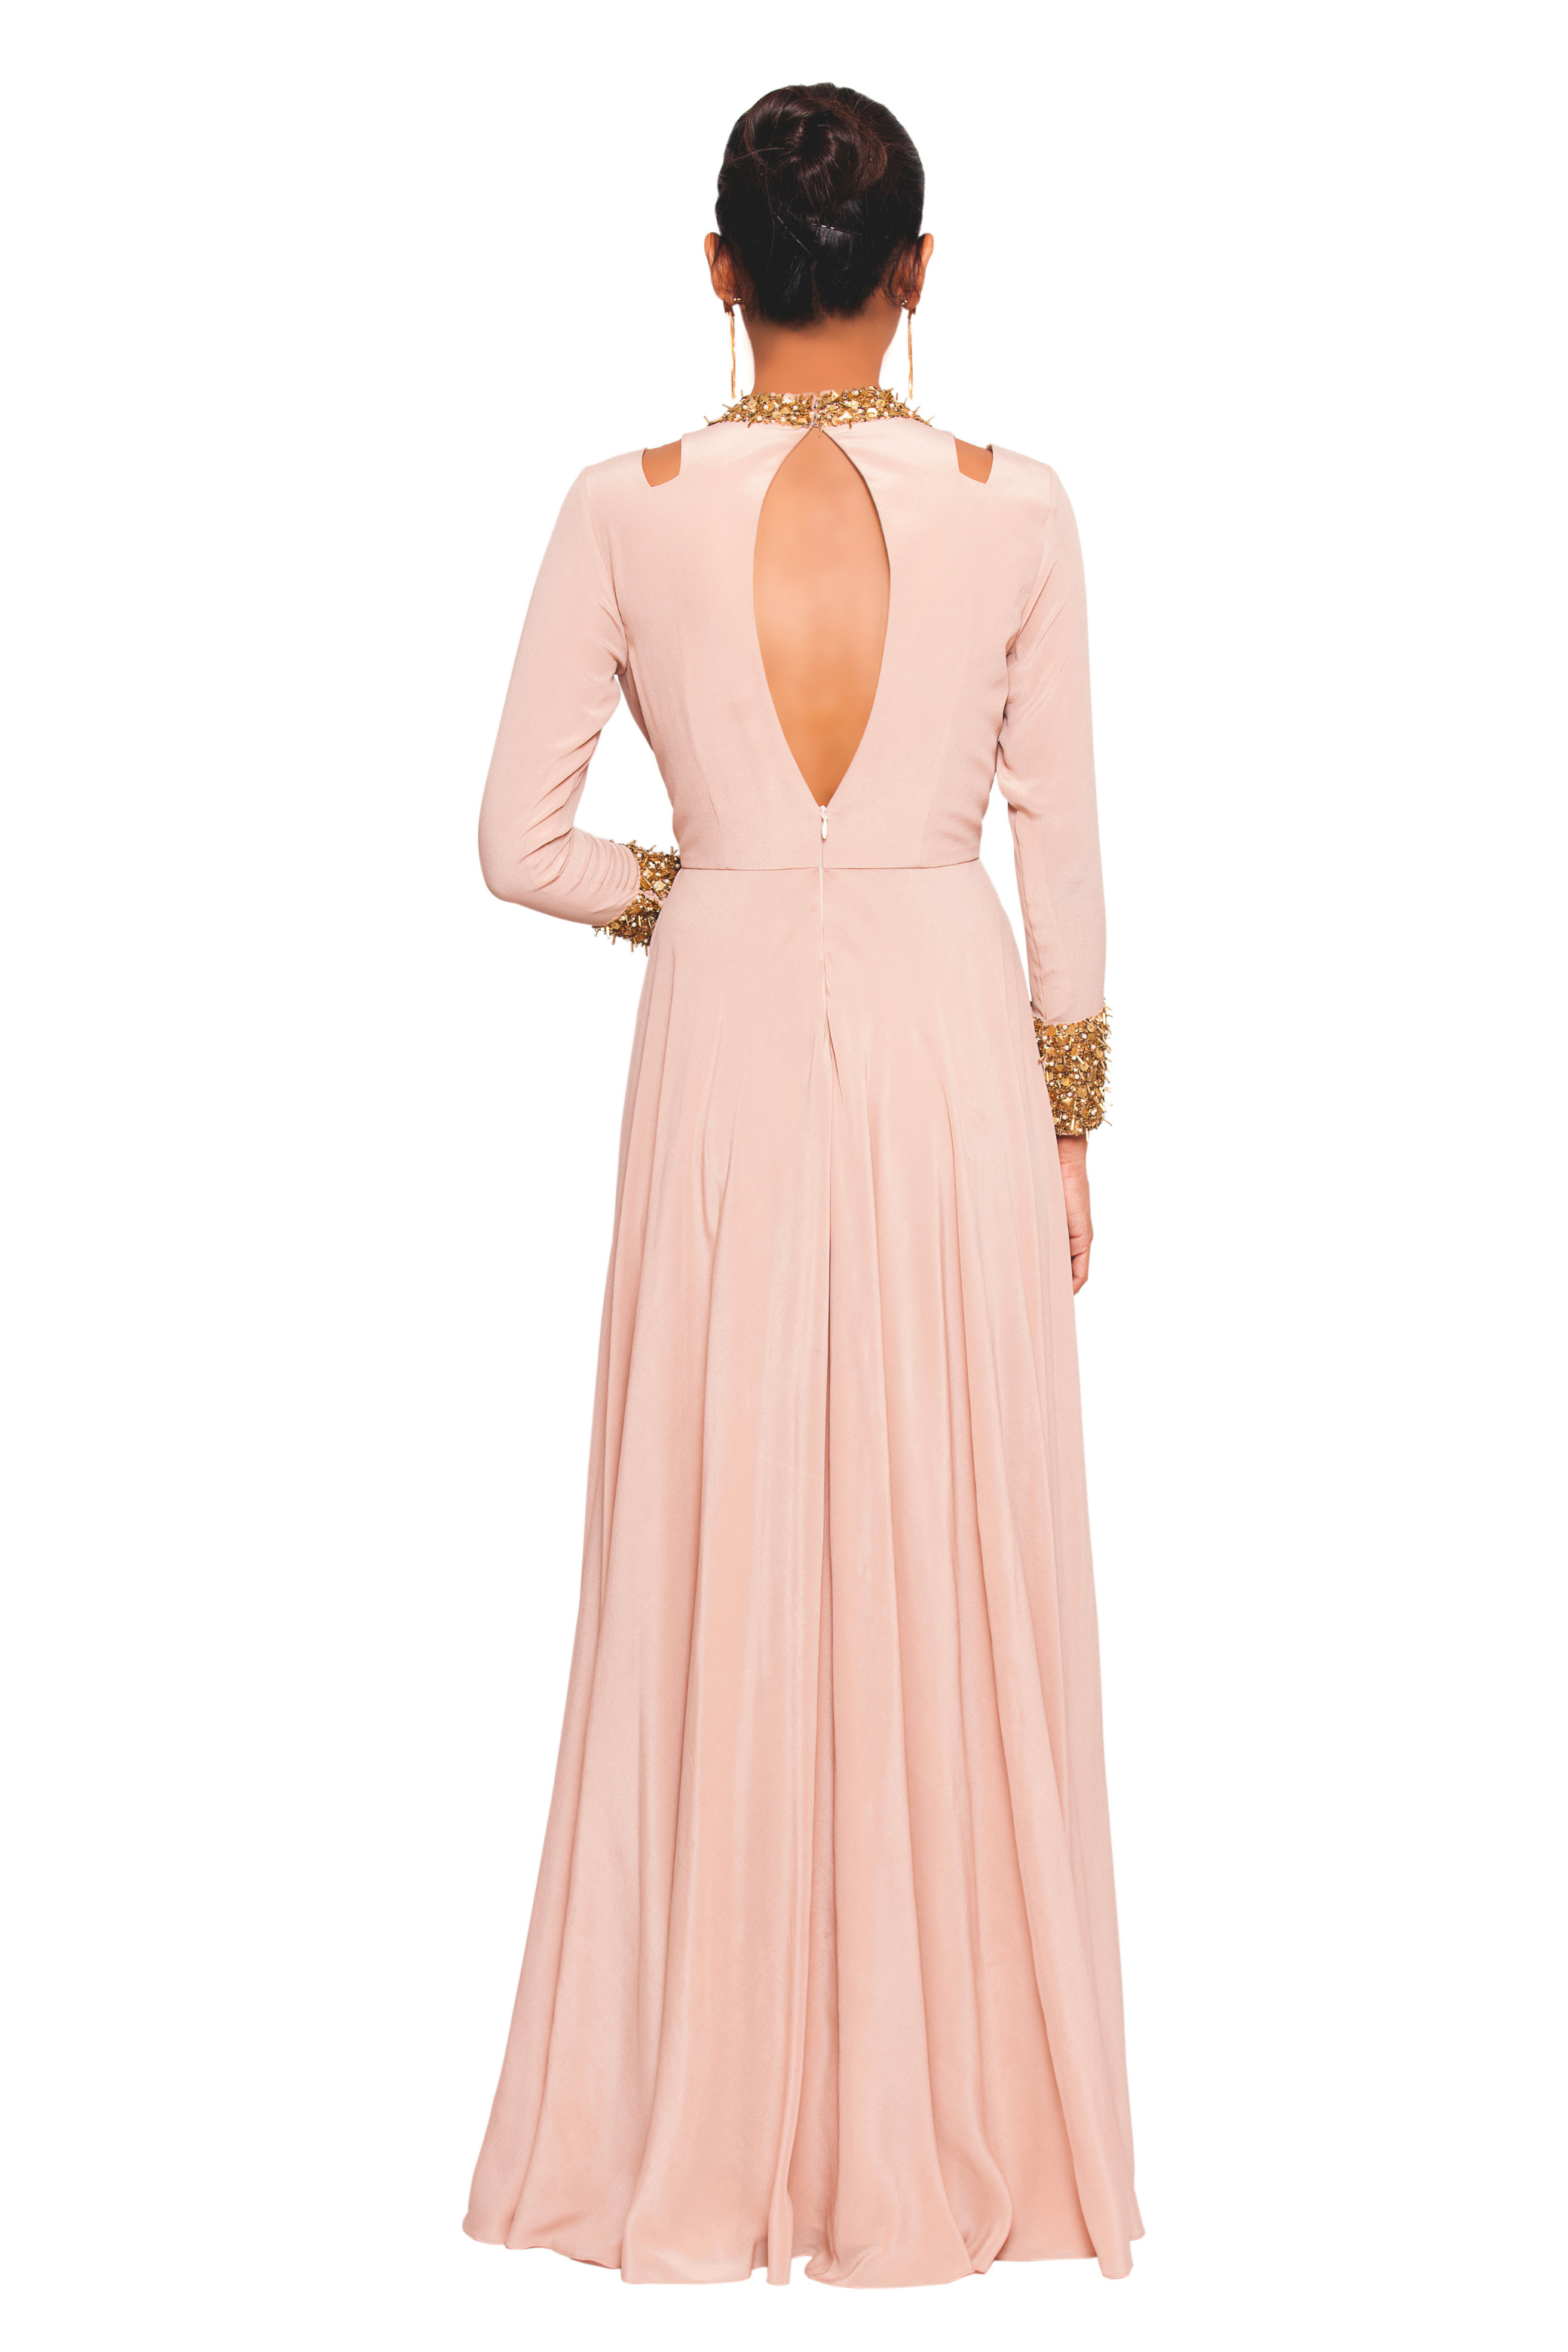 blush pink gown embellished with gold and bronze mettalic nalki 